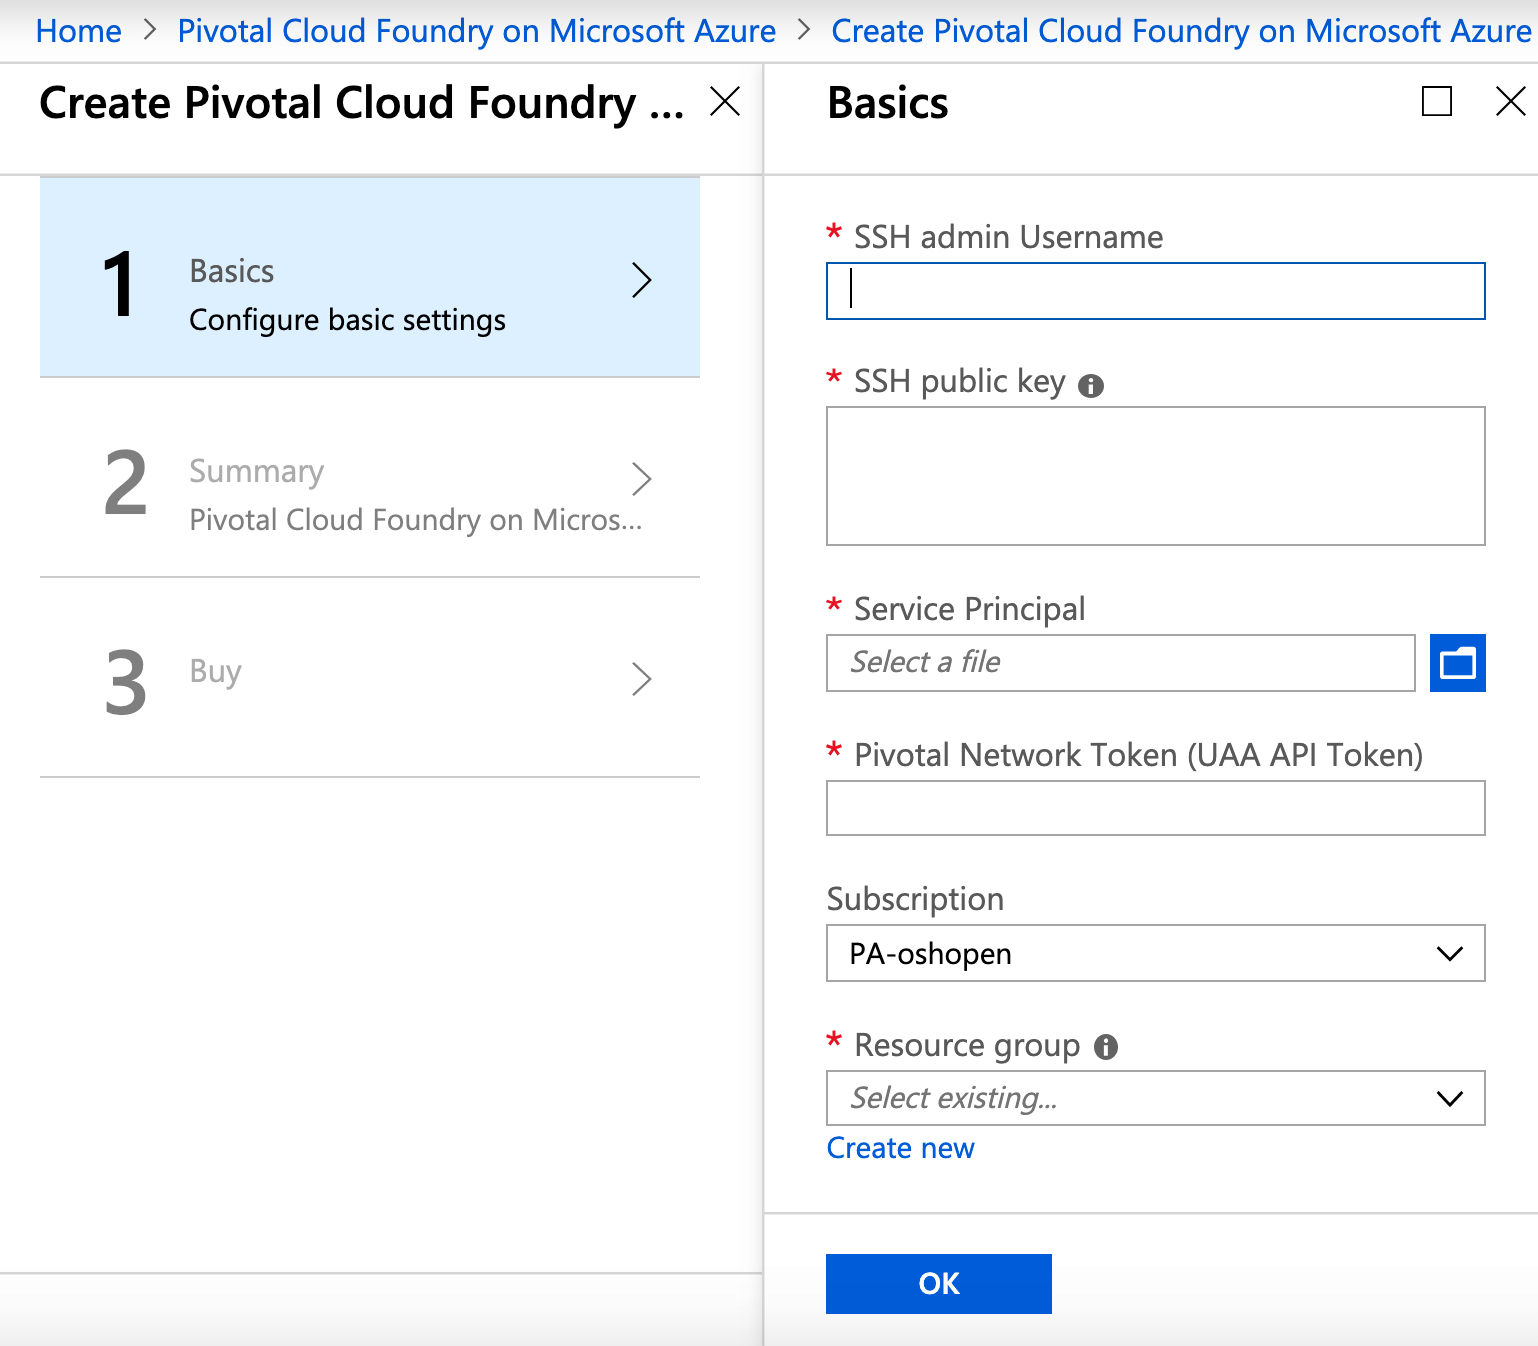 pcf-on-azure-params.png